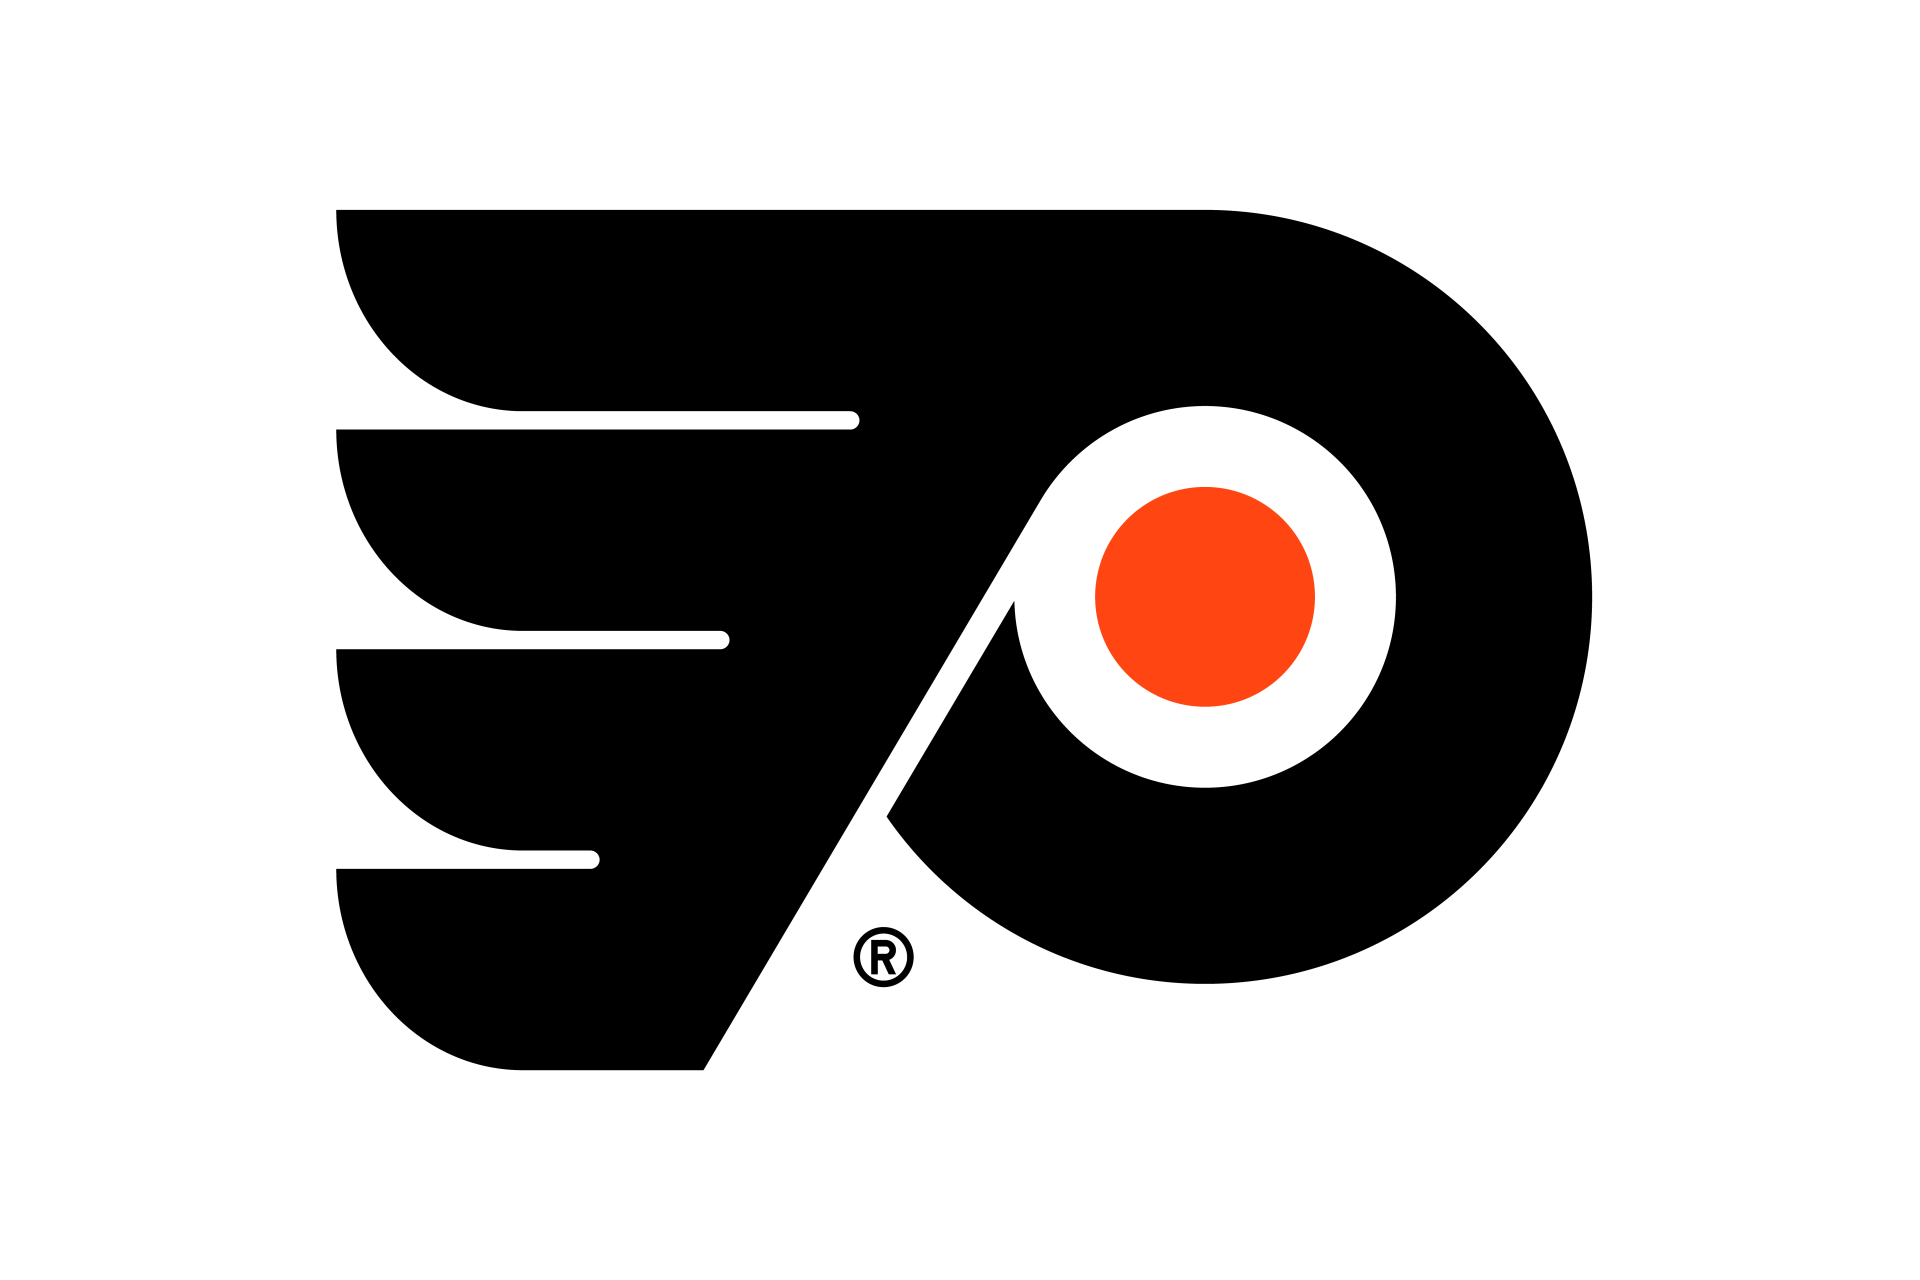 NHL Flyers Wallpapers on WallpaperDog